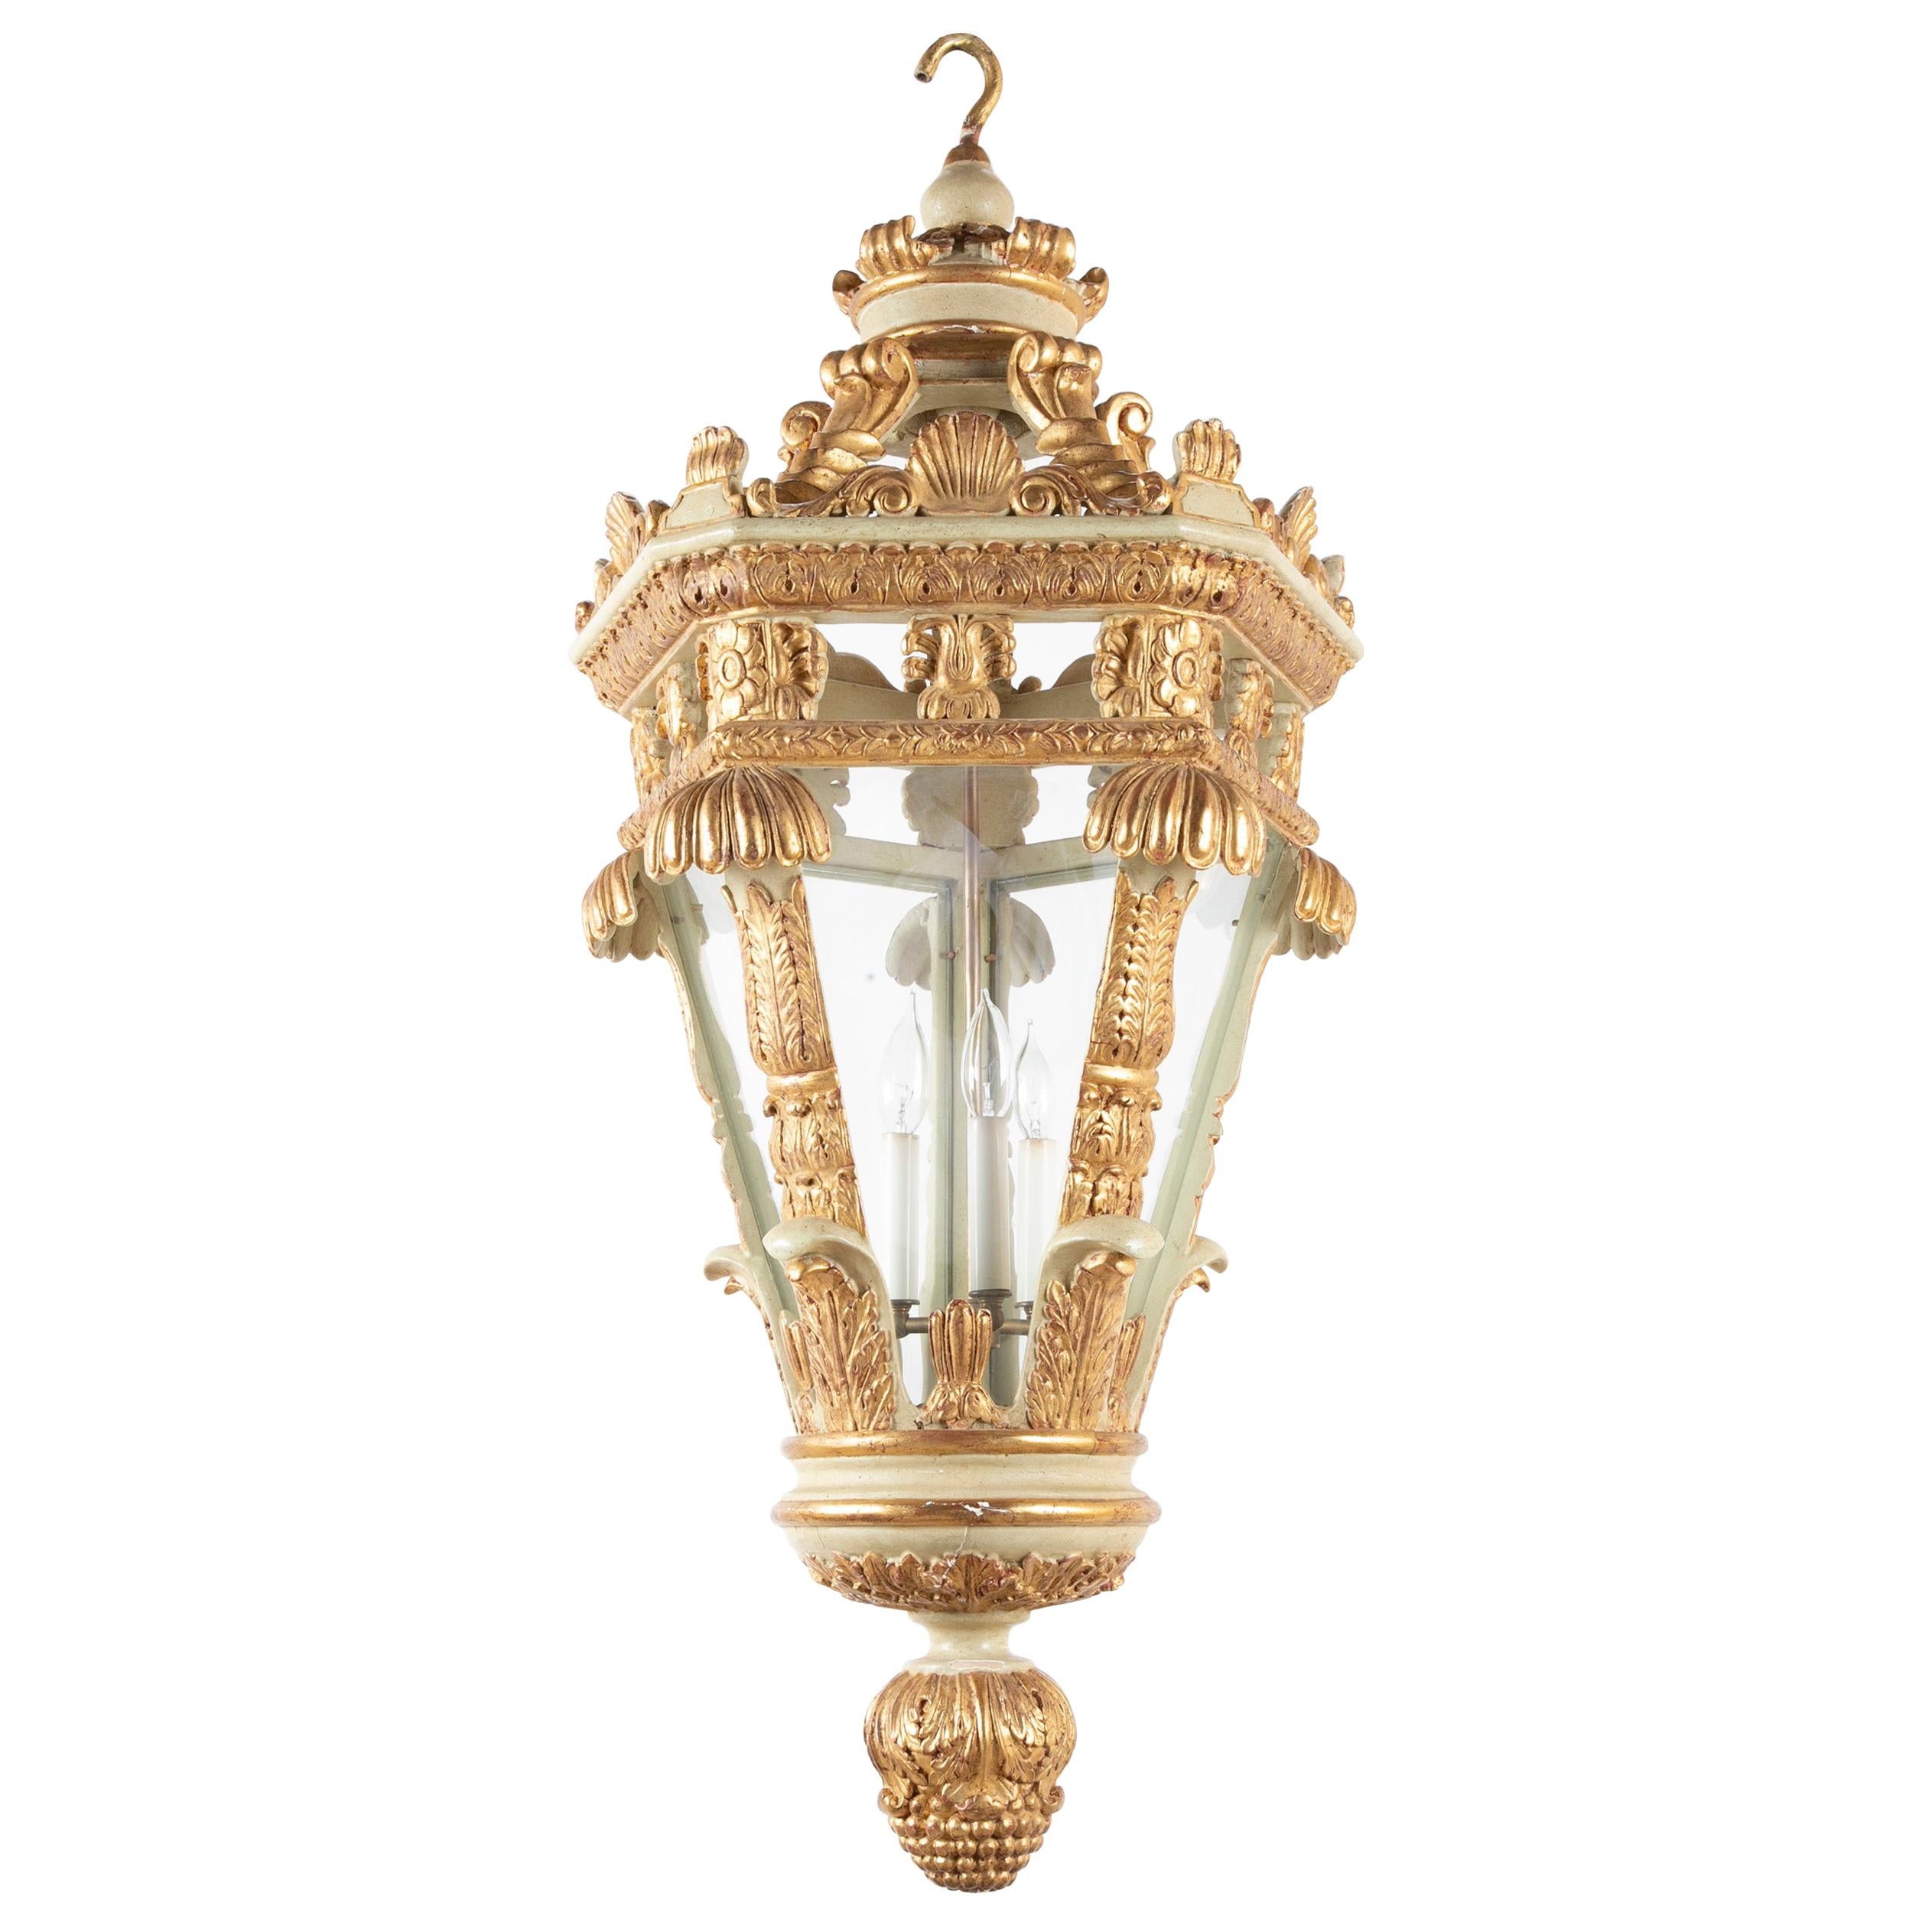 Italian Painted and Gilded Five-Sided Lantern